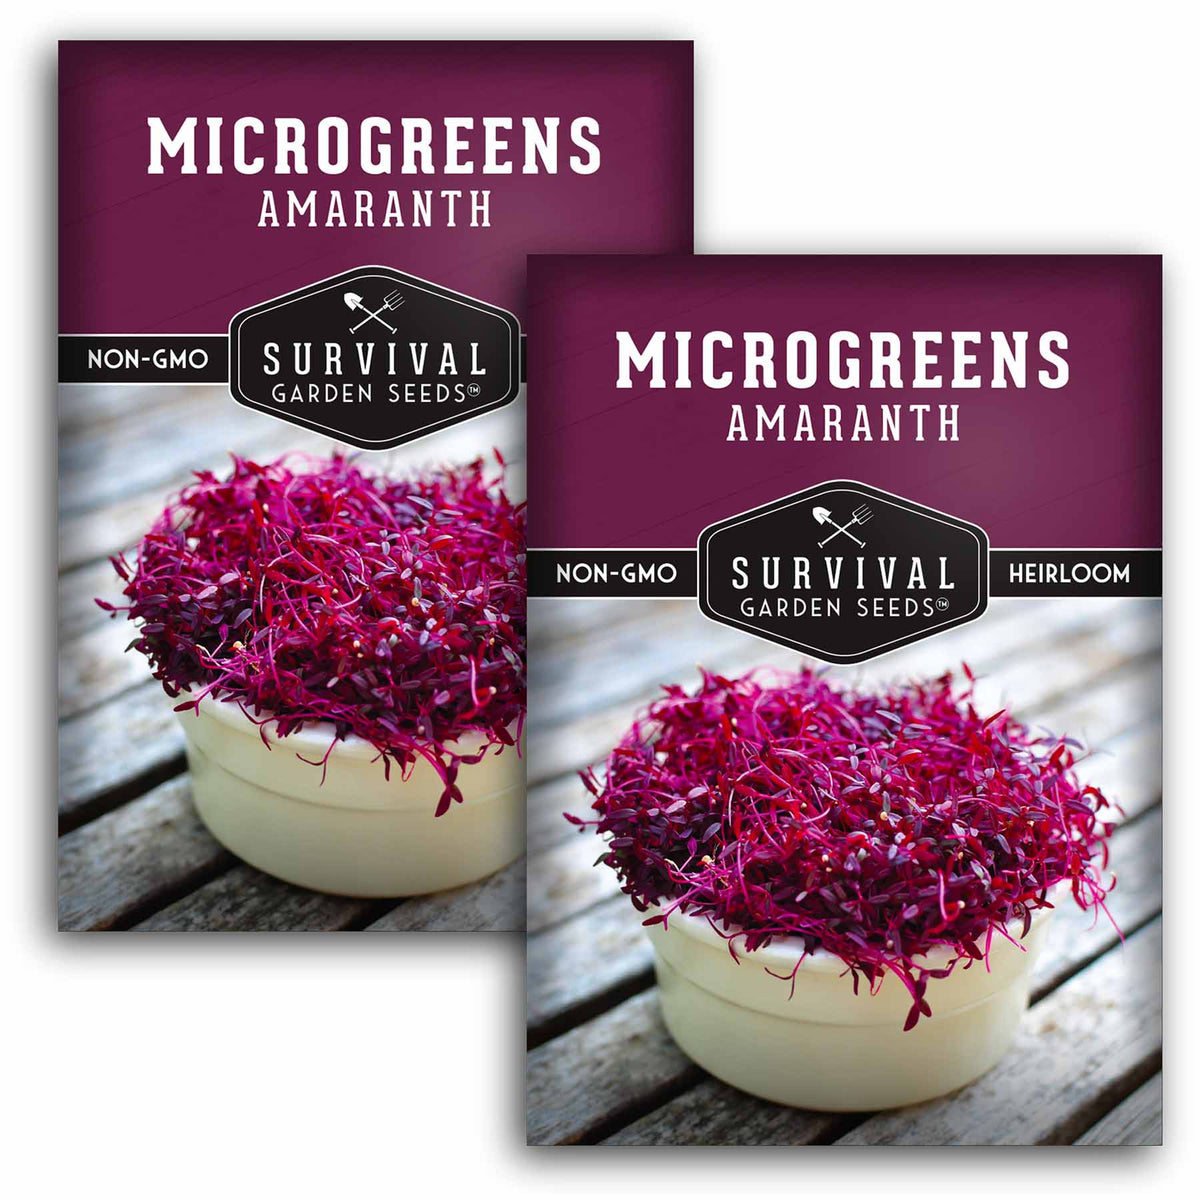 2 packets of Amaranth Microgreens seeds